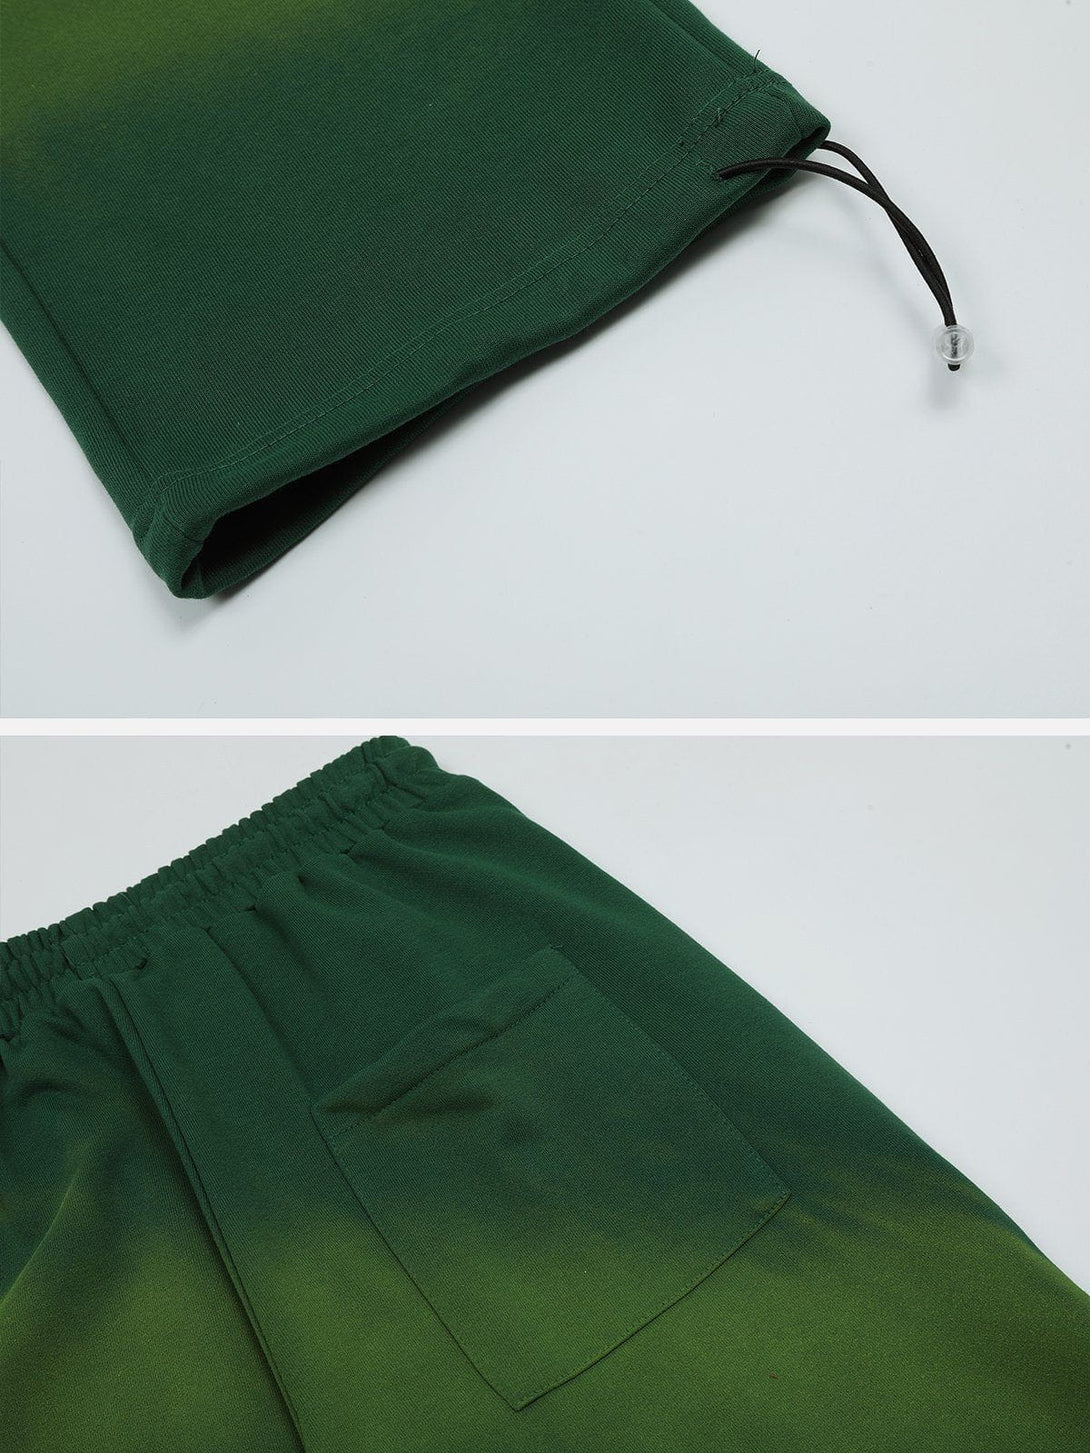 Levefly - Light and Shade Gradient Sweatpants - Streetwear Fashion - levefly.com